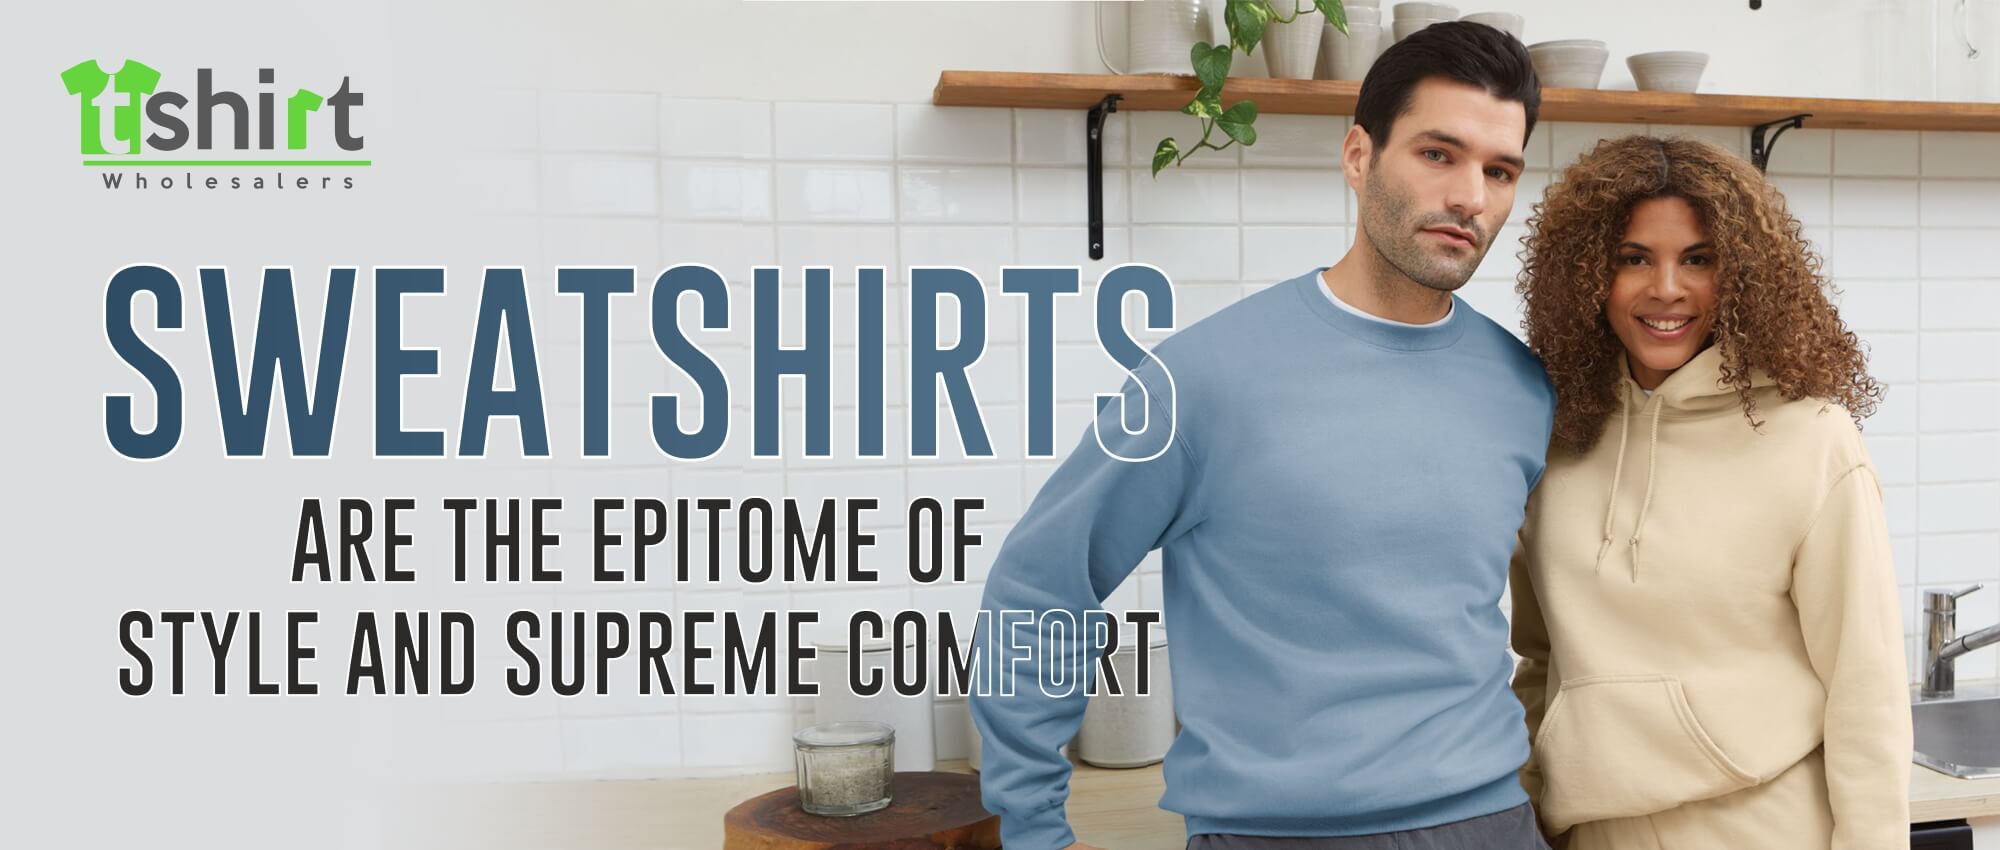 SWEATSHIRTS ARE THE EPITOME OF STYLE AND SUPREME COMFORT